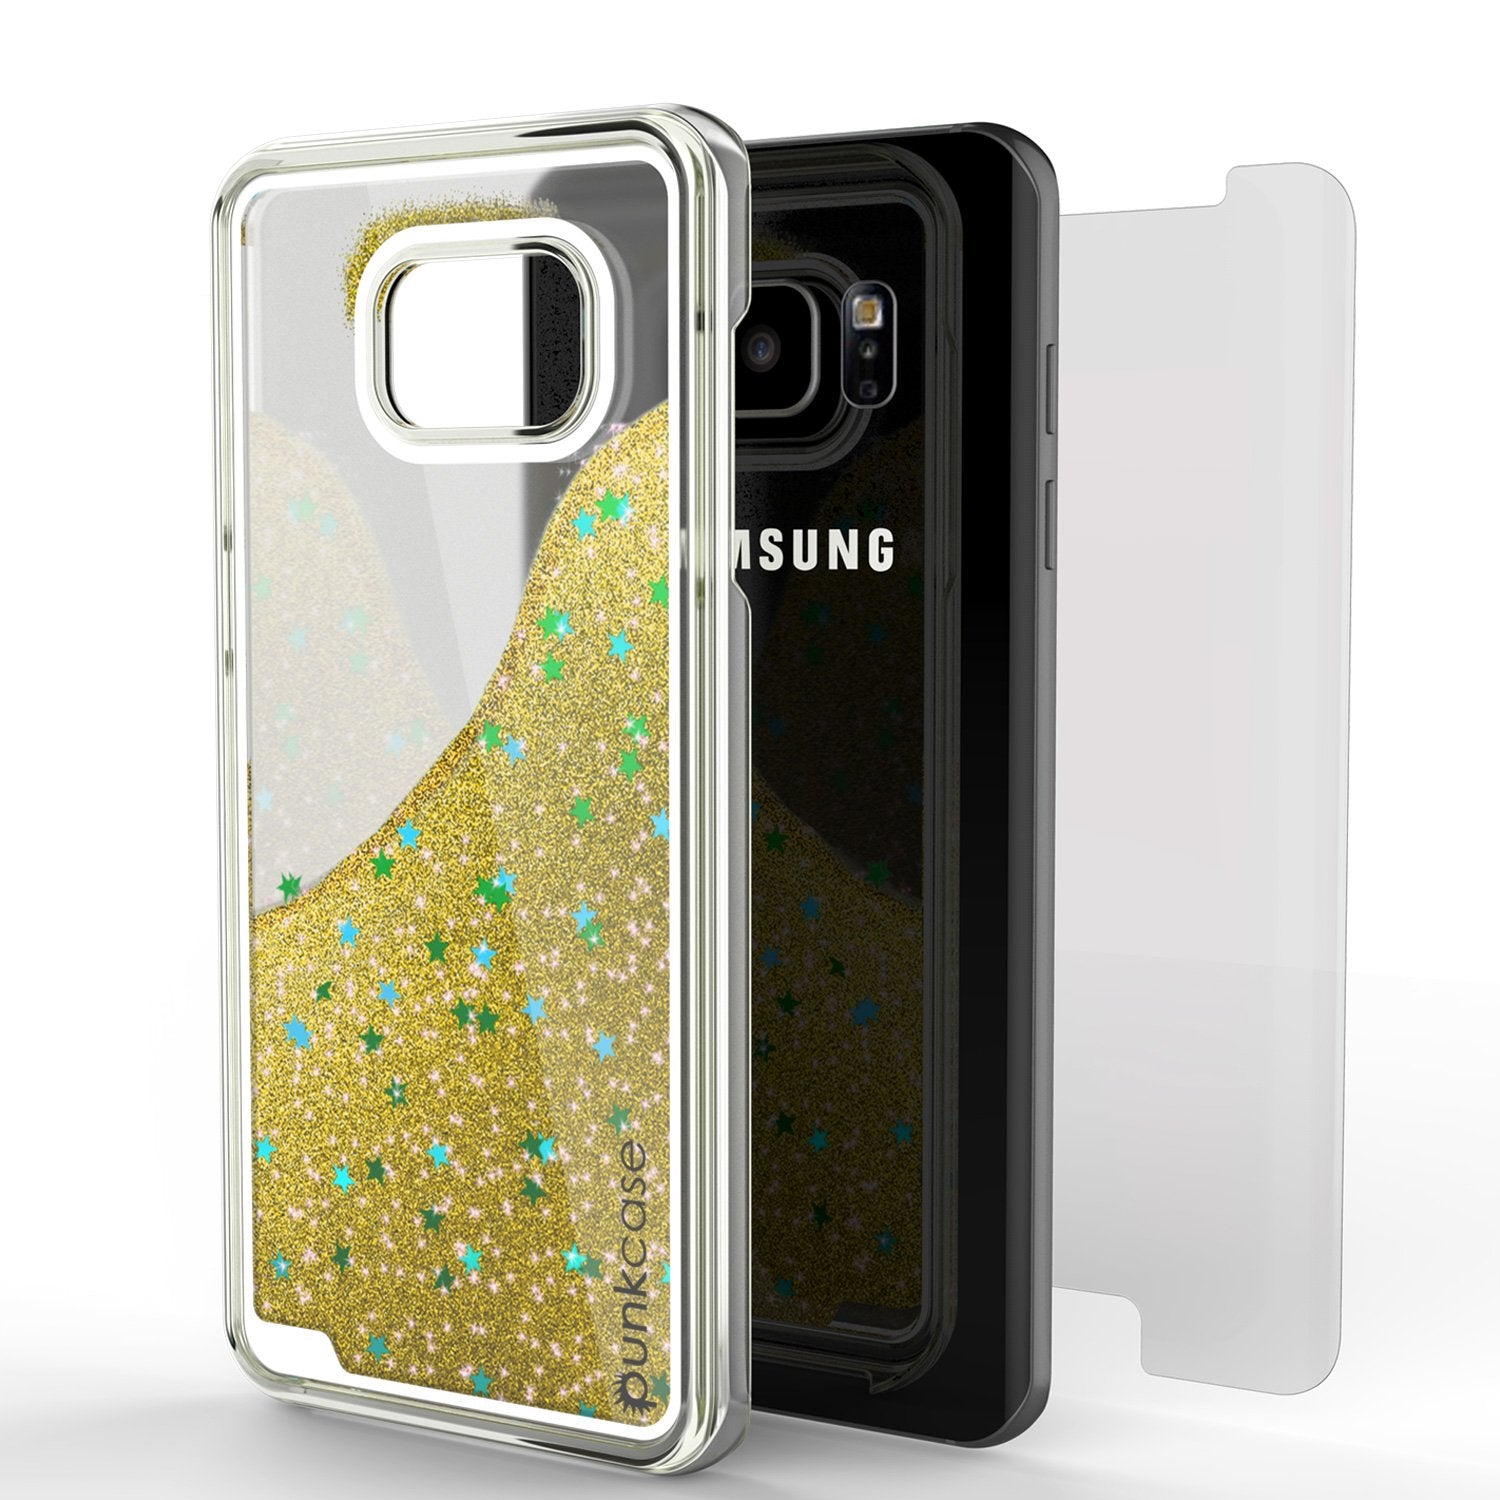 S7 Edge Case, Punkcase [Liquid GOLD Series] Protective Dual Layer Floating Glitter Cover with lots of Bling & Sparkle + PunkShield Screen Protector - PunkCase NZ